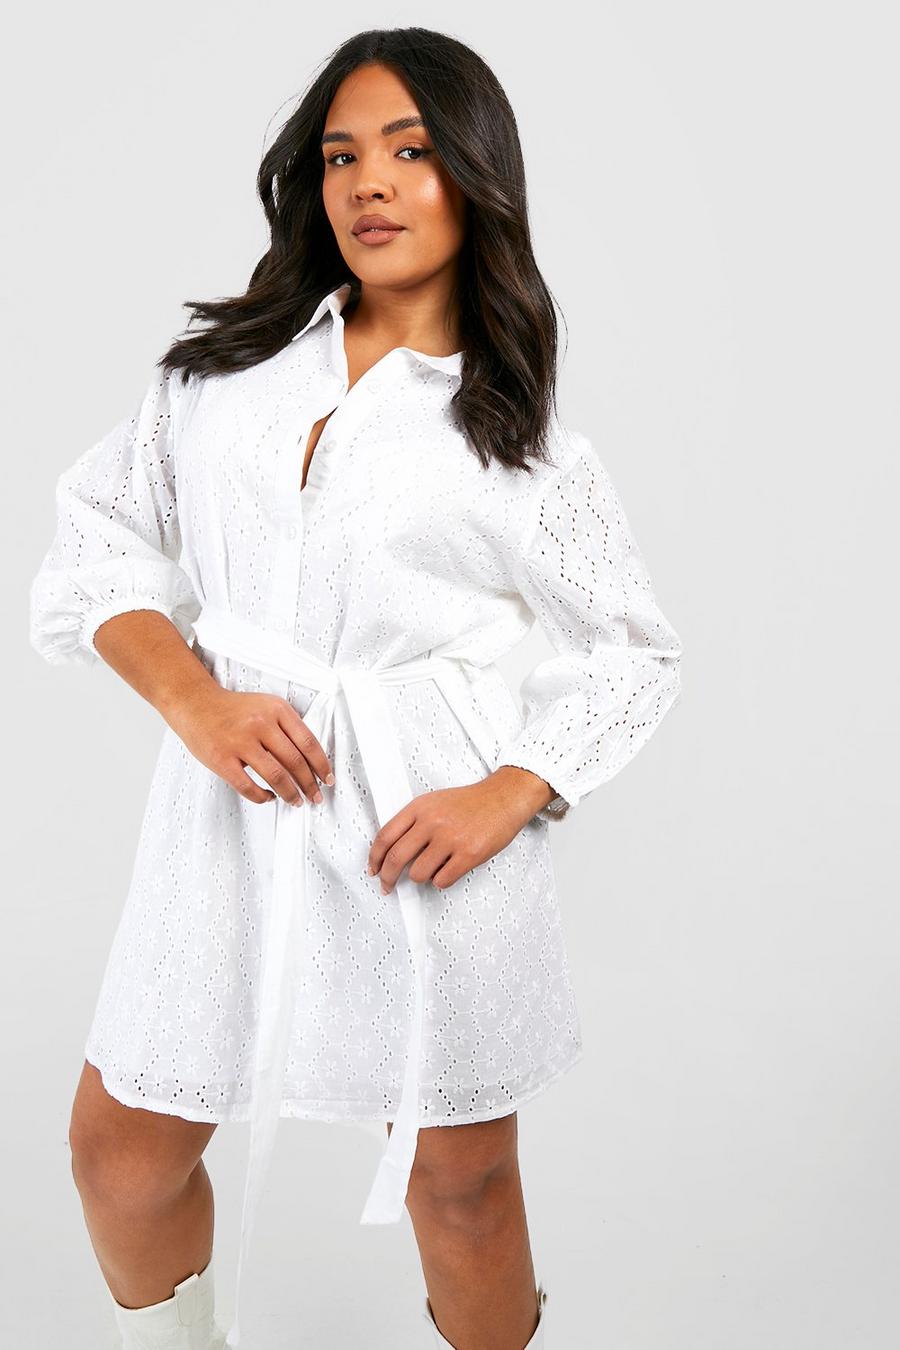 Broderie Anglaise Dresses | Broderie Dresses | boohoo UK